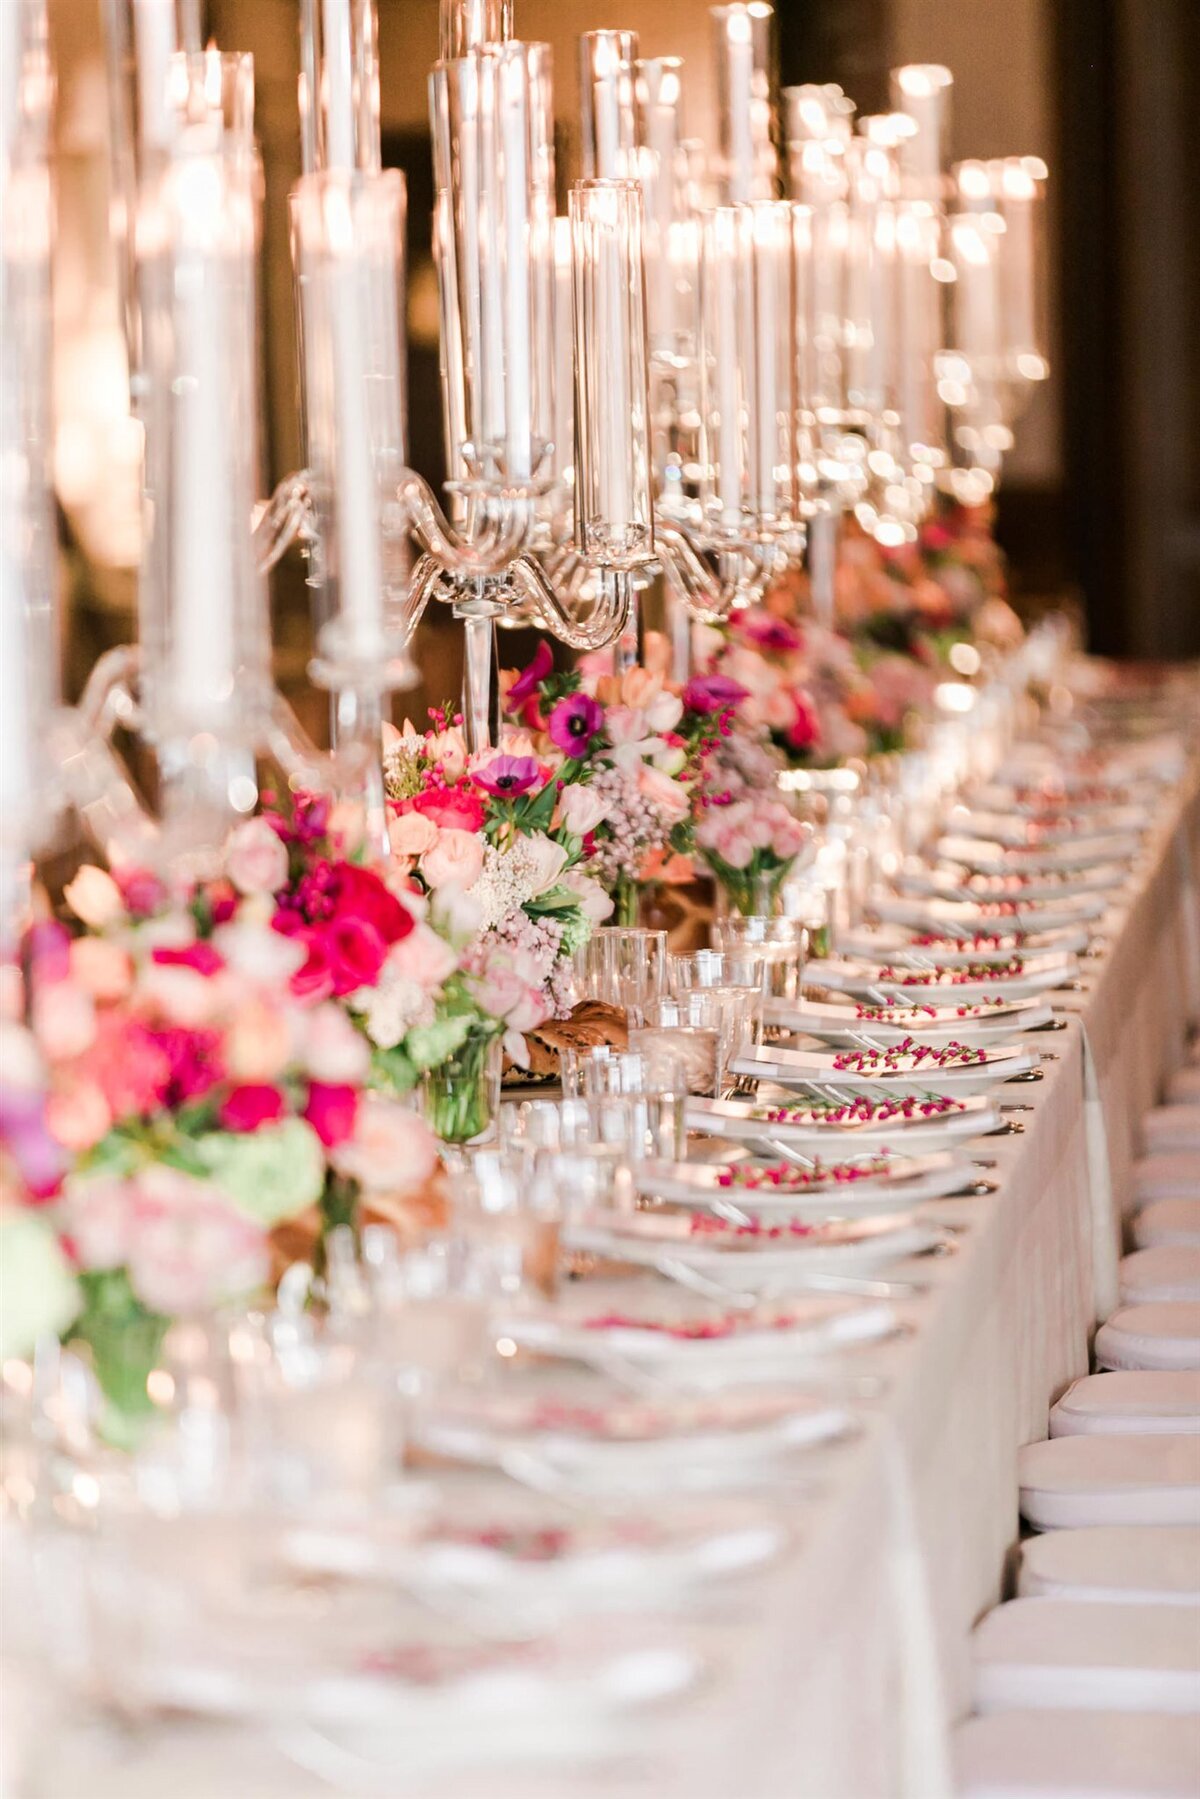 Colorful Beverly Hills Rehearsal Dinner-Valorie Darling Photography-9831